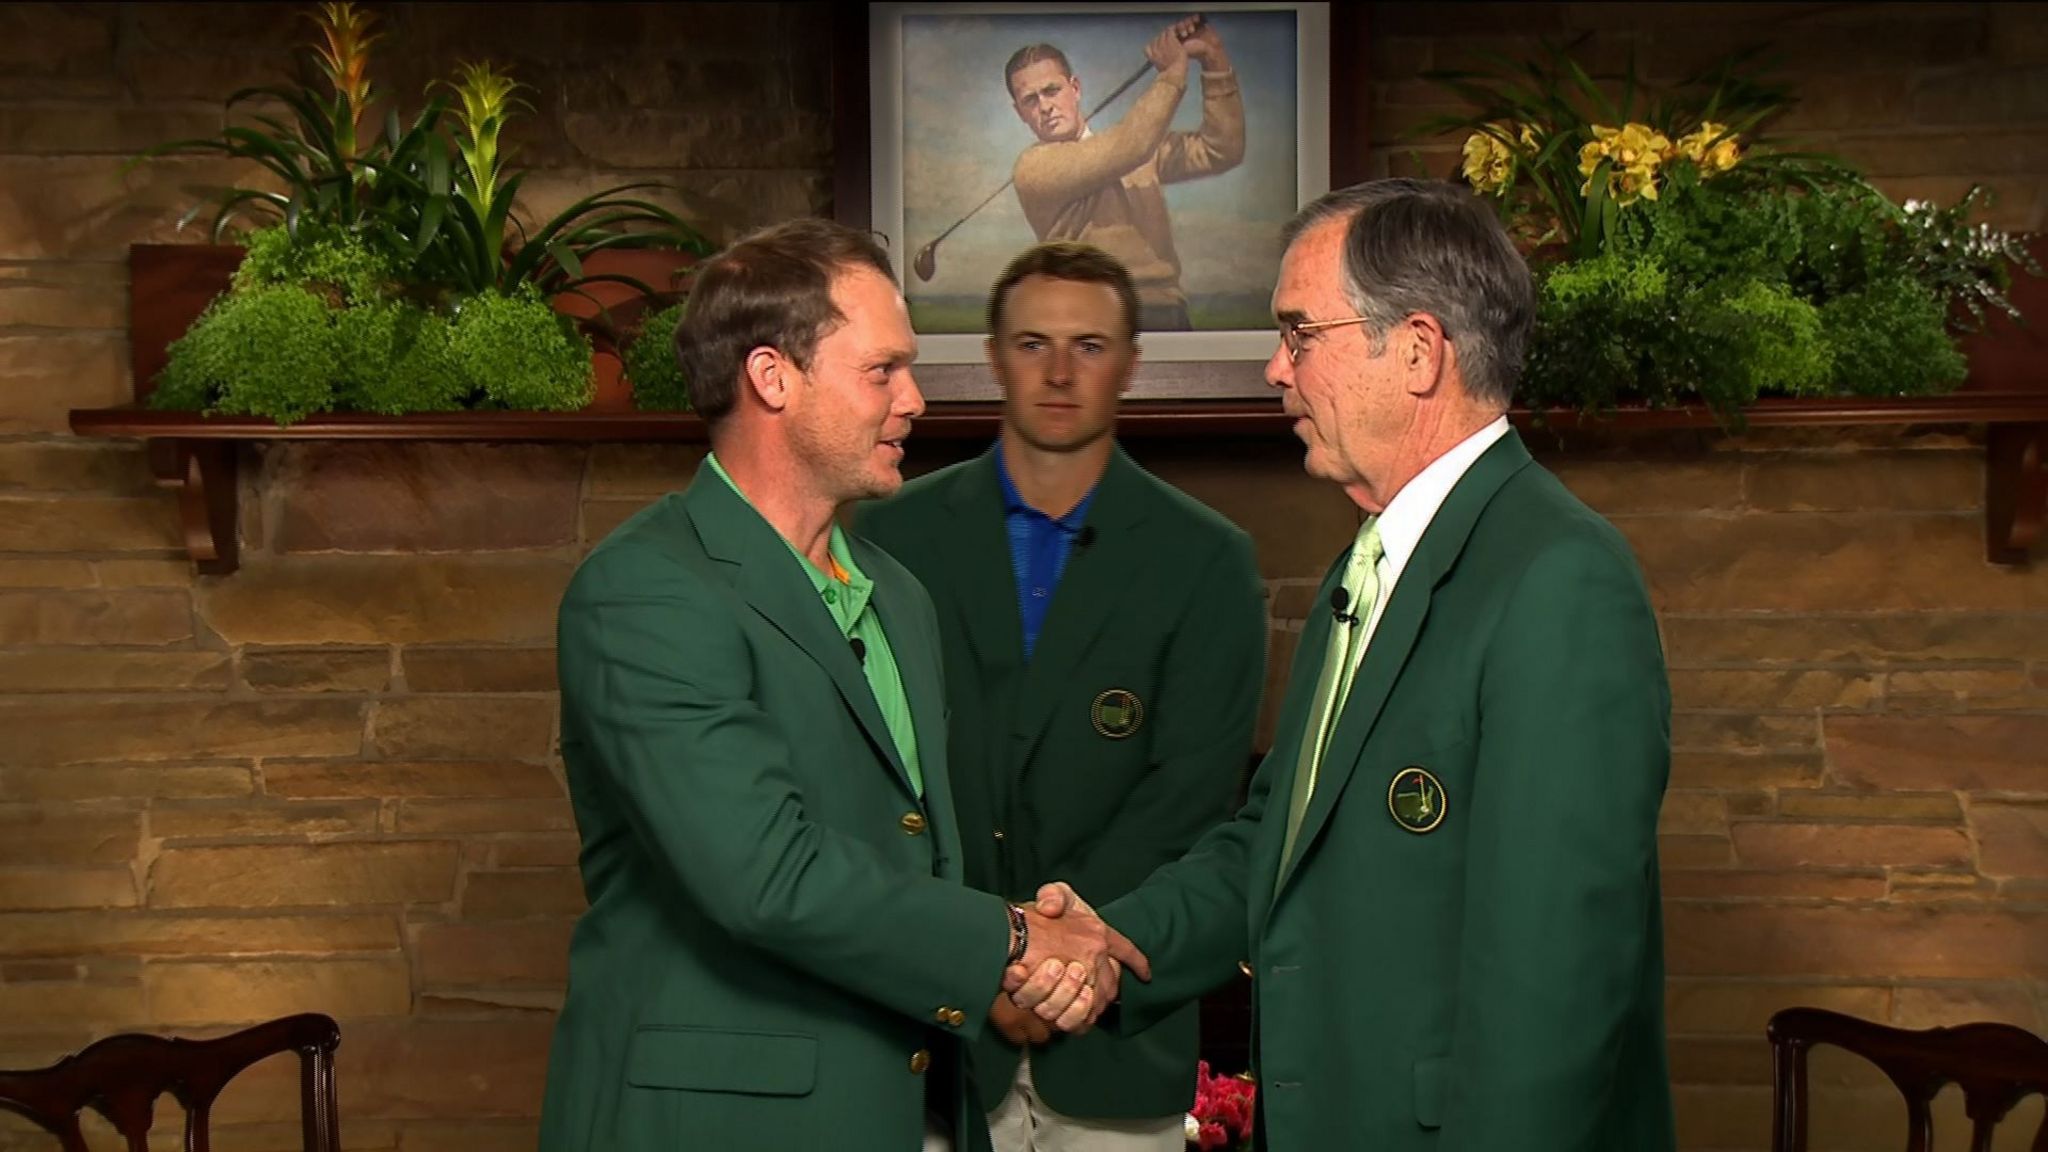 Danny Willett is presented with the Green Jacket